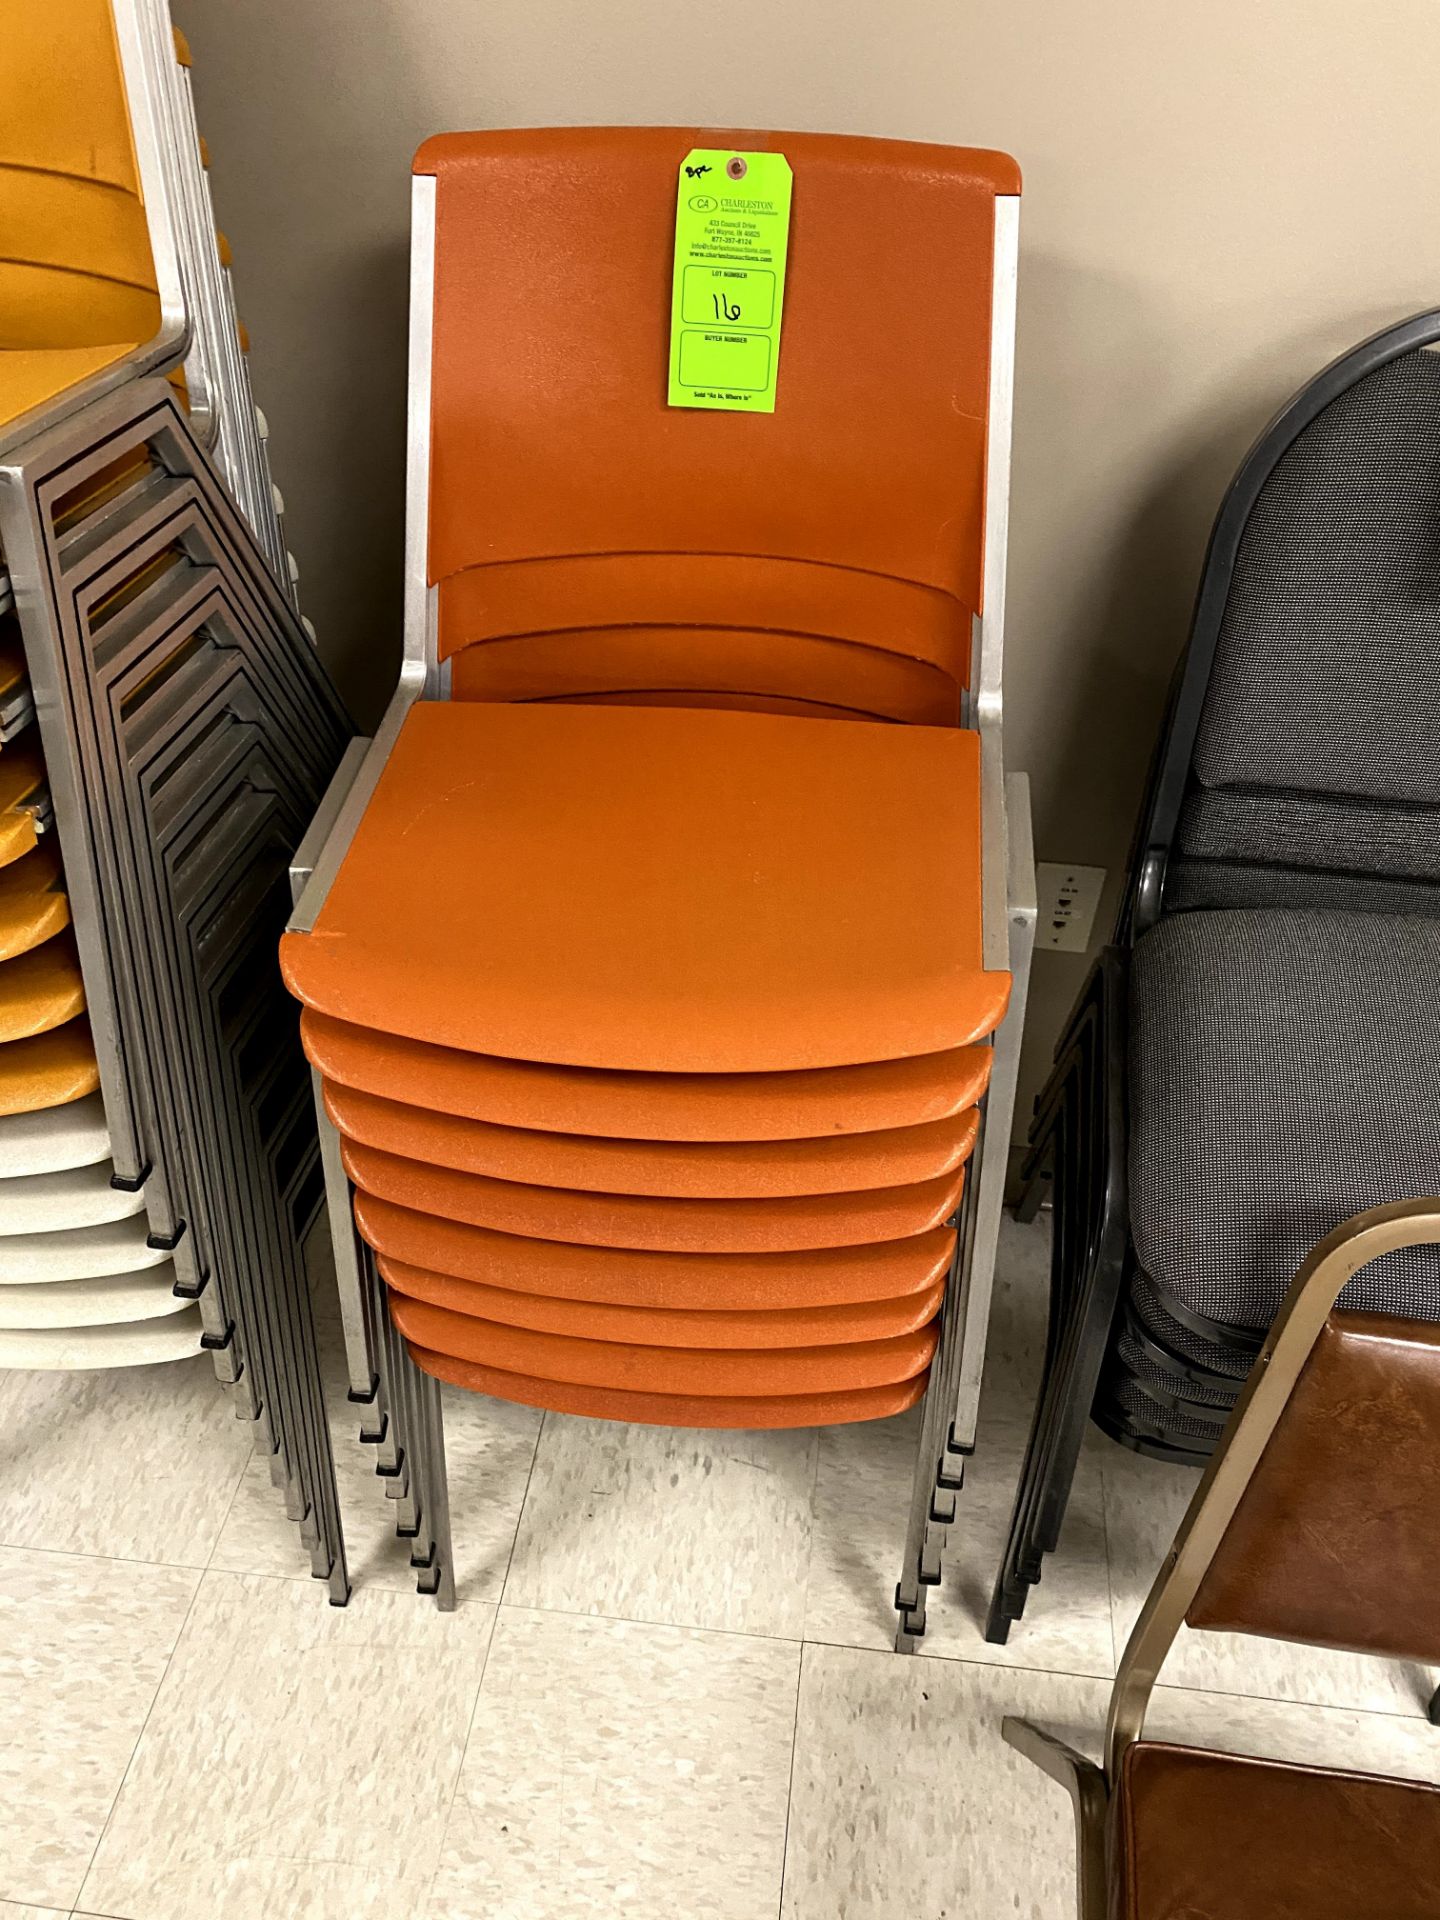 (8) ORANGE ALUMINUM STACKABLE CHIAIR(S) WITH PLASTIC SEAT & BACK -- (7625 OMNITECH PLACE VICTOR